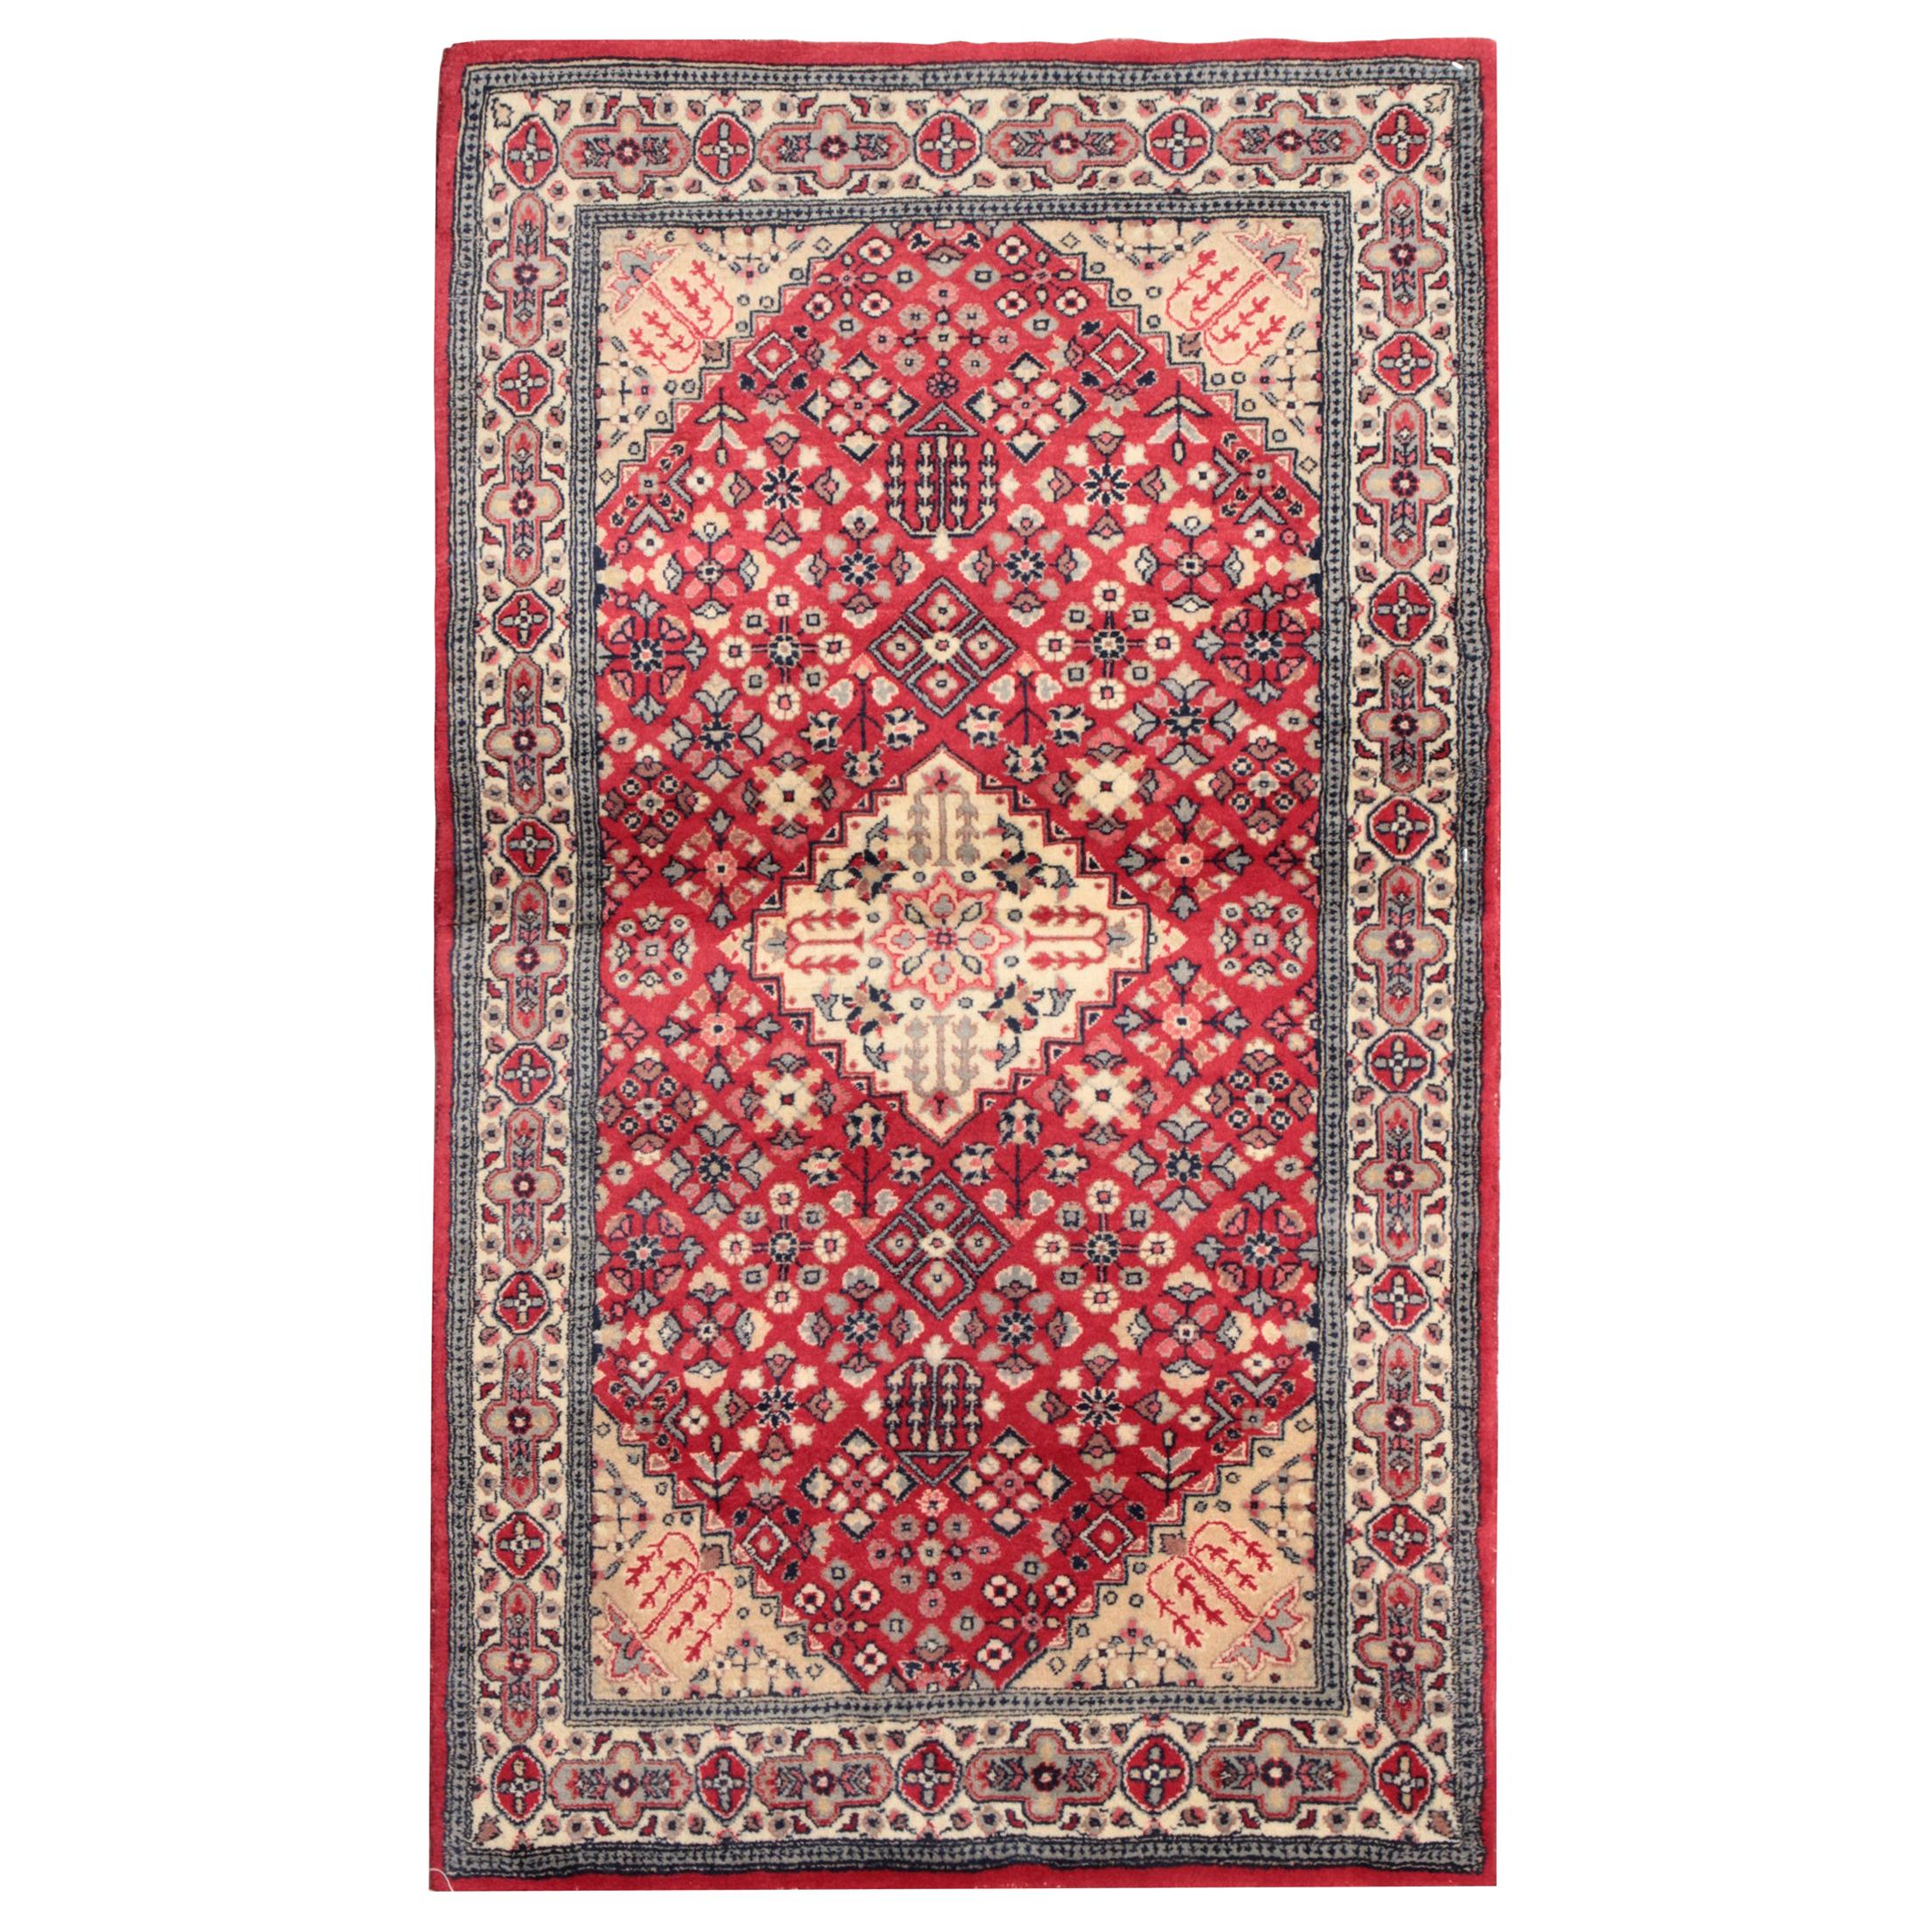 Traditional Area Rugs, Indian Carpet Red Rug, Floor Rugs for Sale 